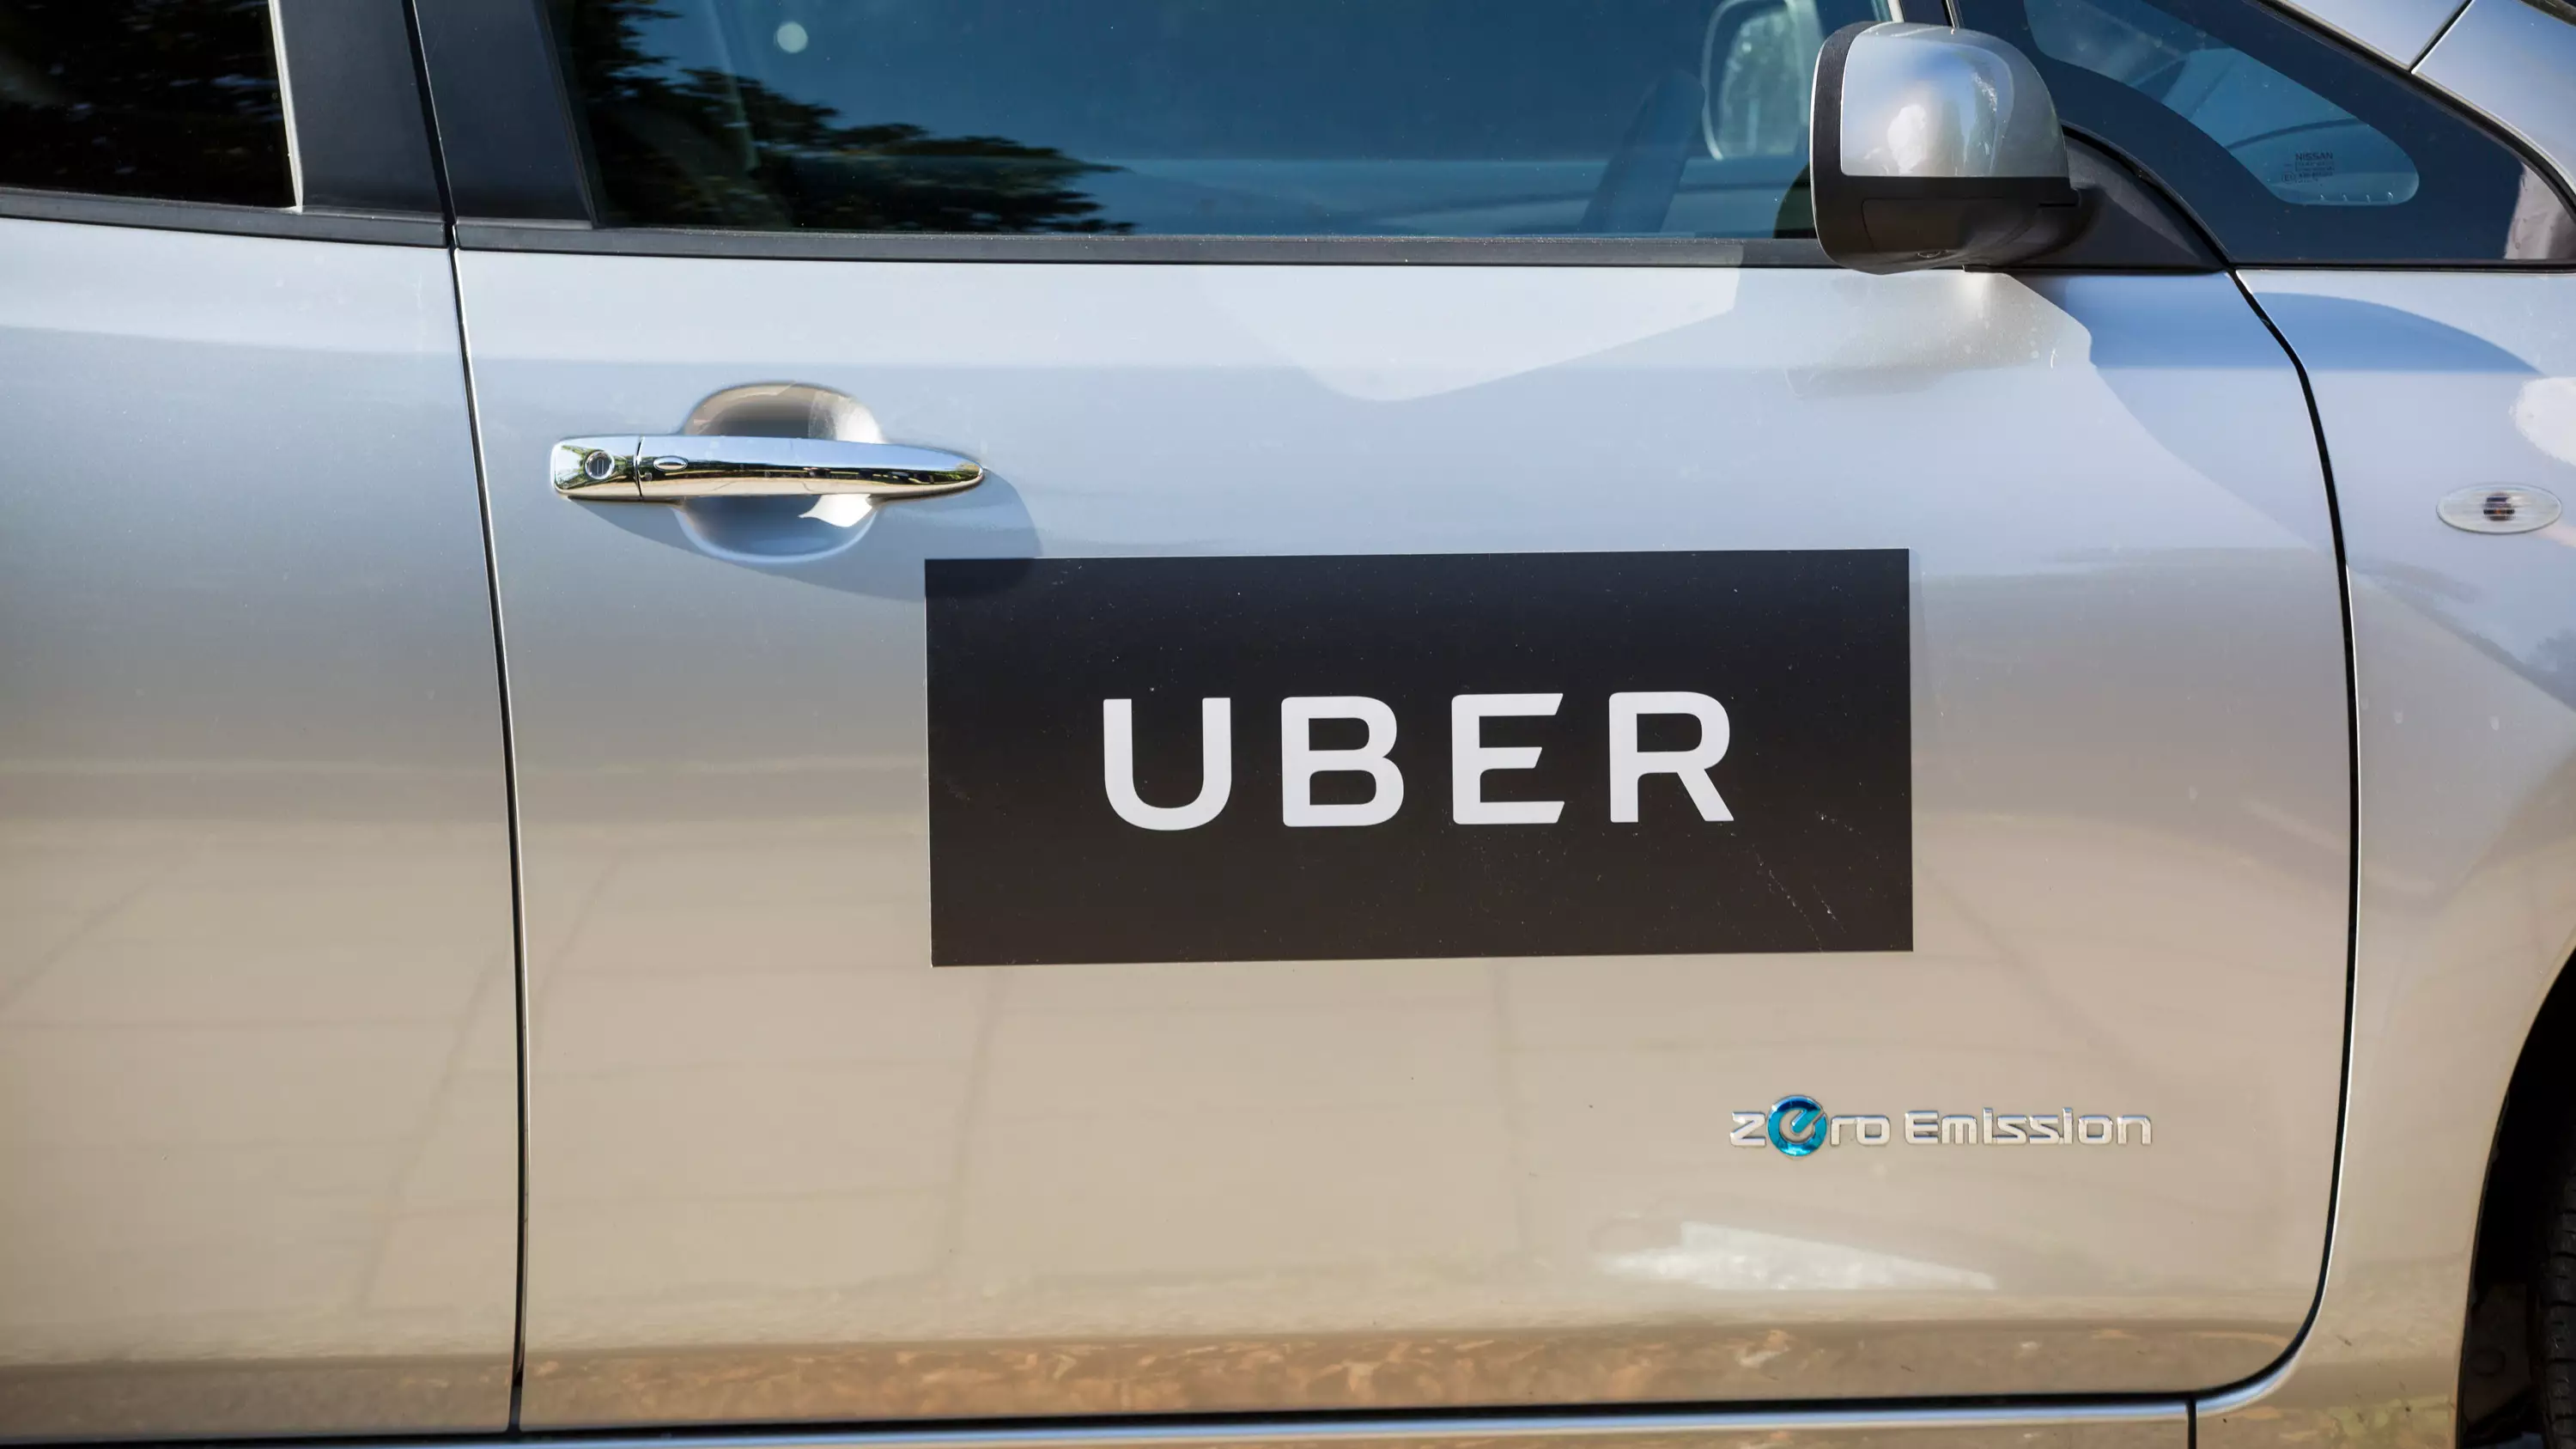 Uber Passenger Threatens Driver With Rape Claim To Get Own Way